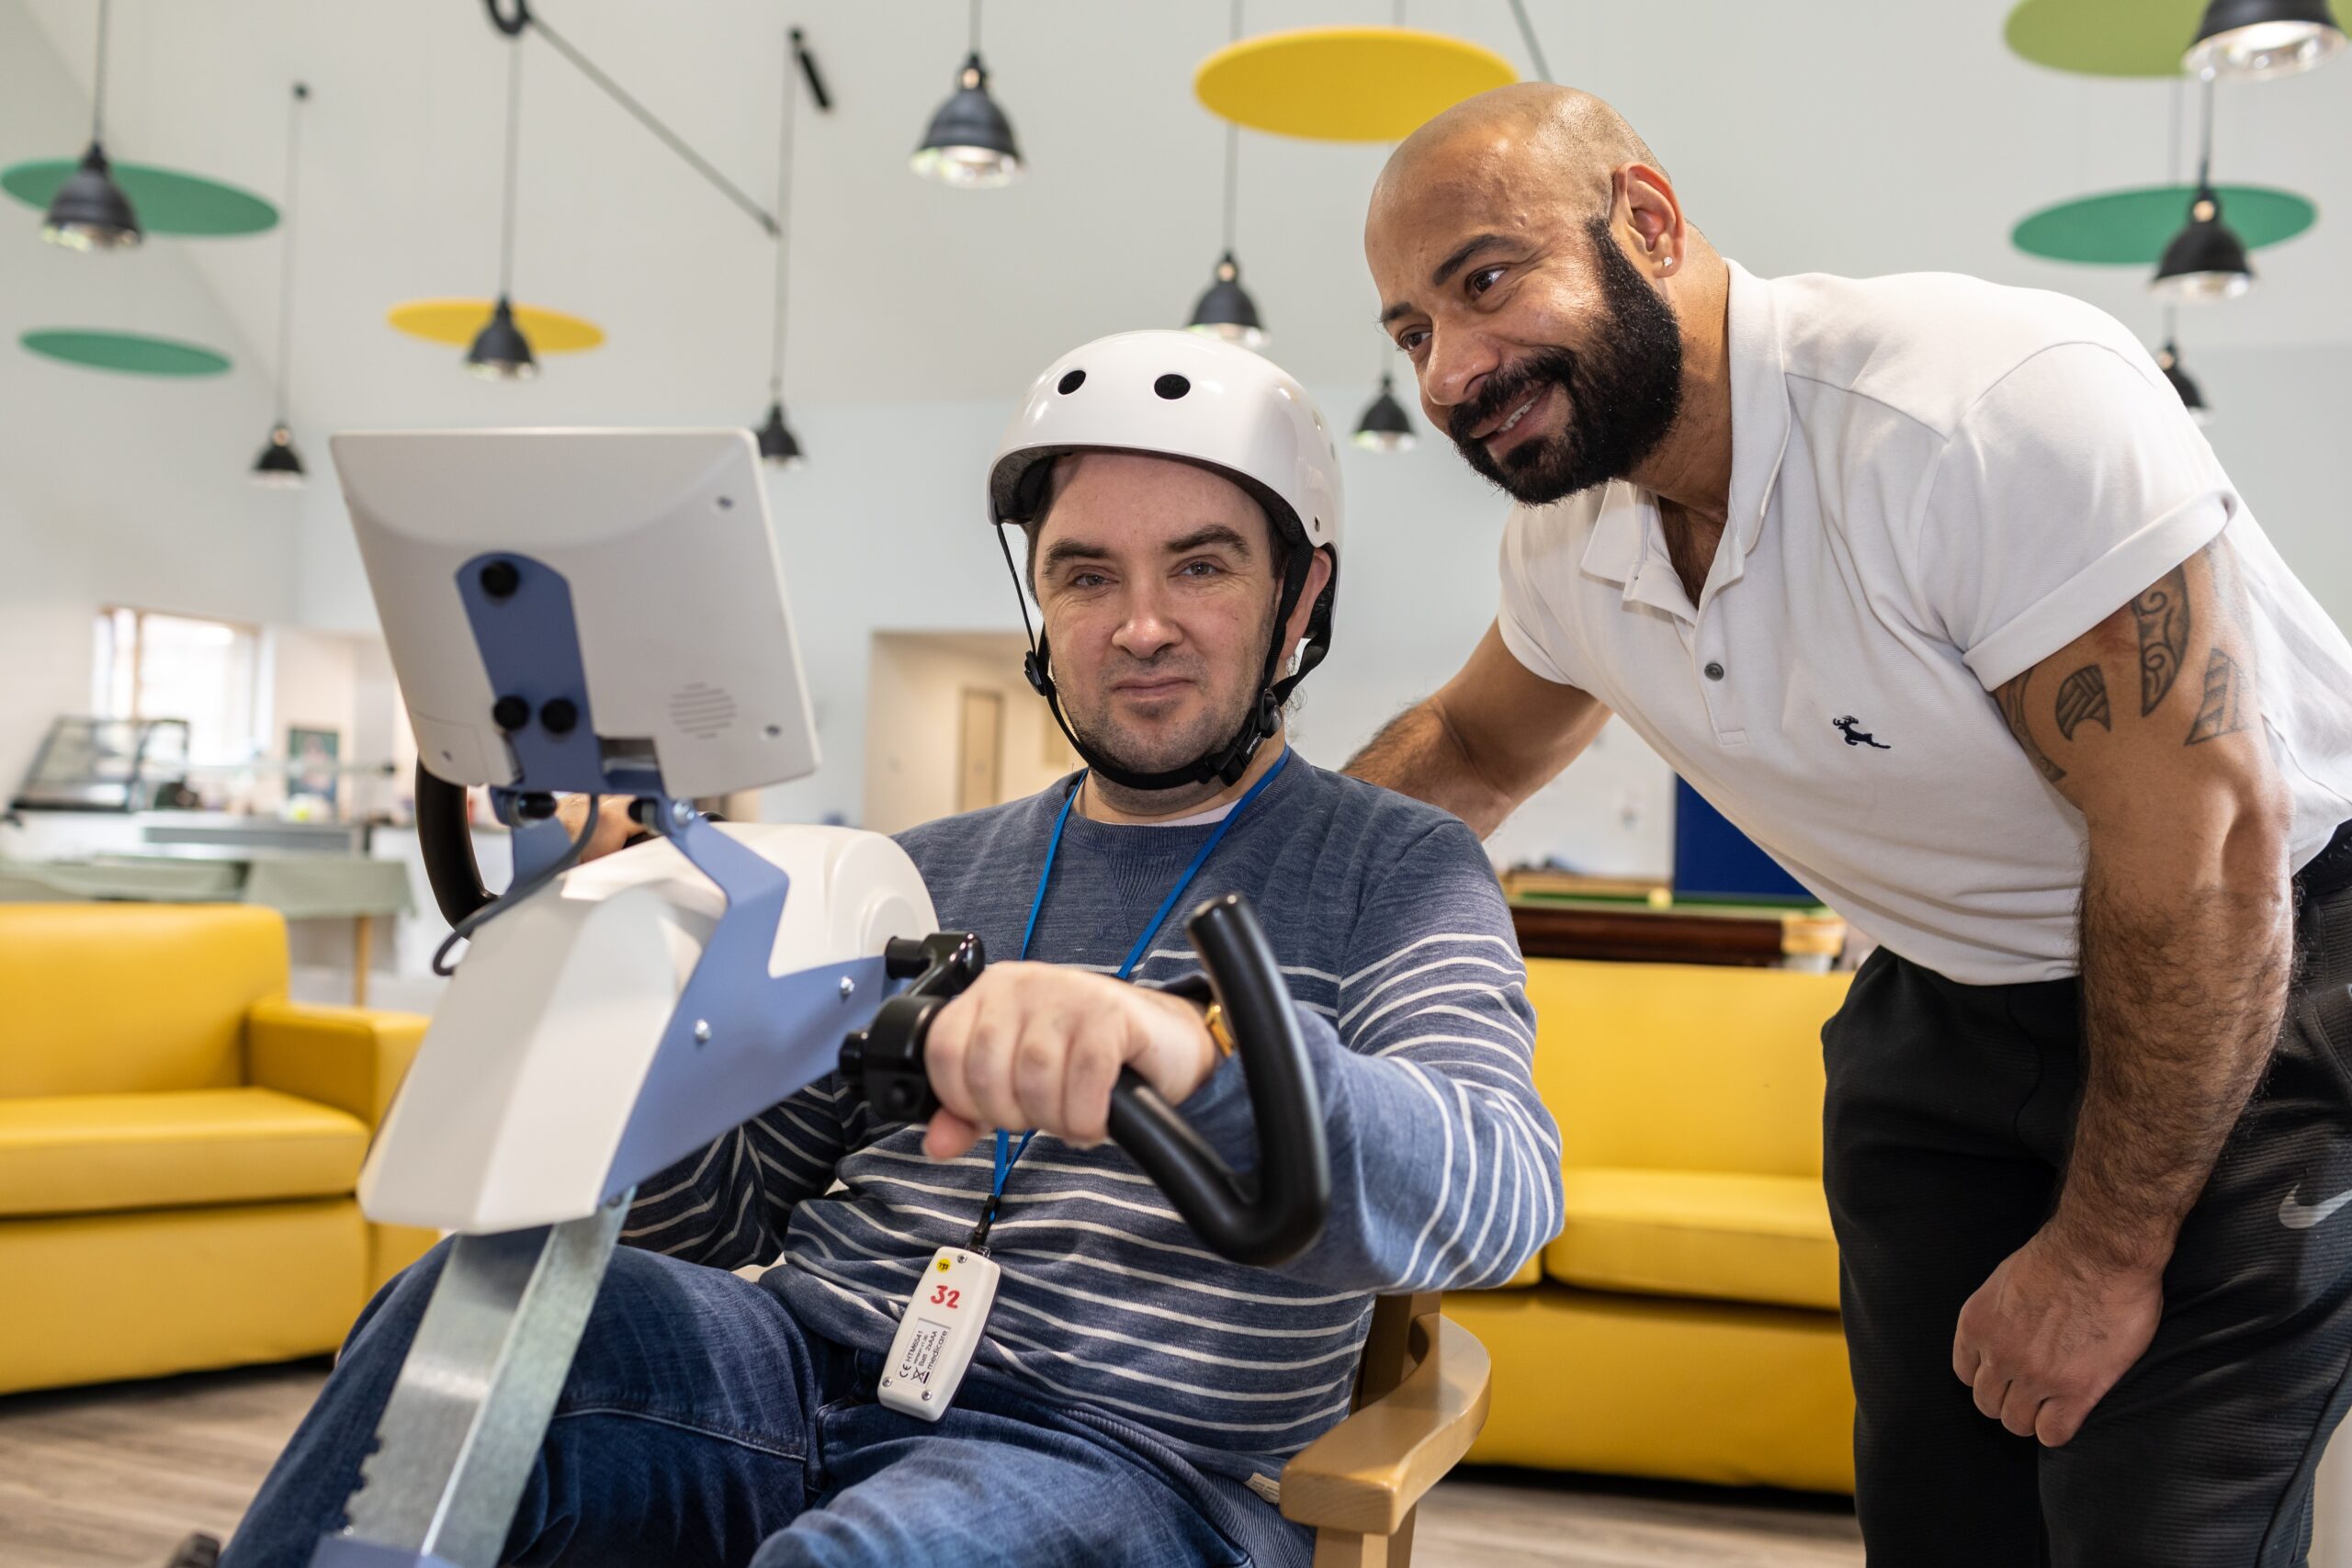 man on an exercise bike wearing a white helmet, supported by a therapist